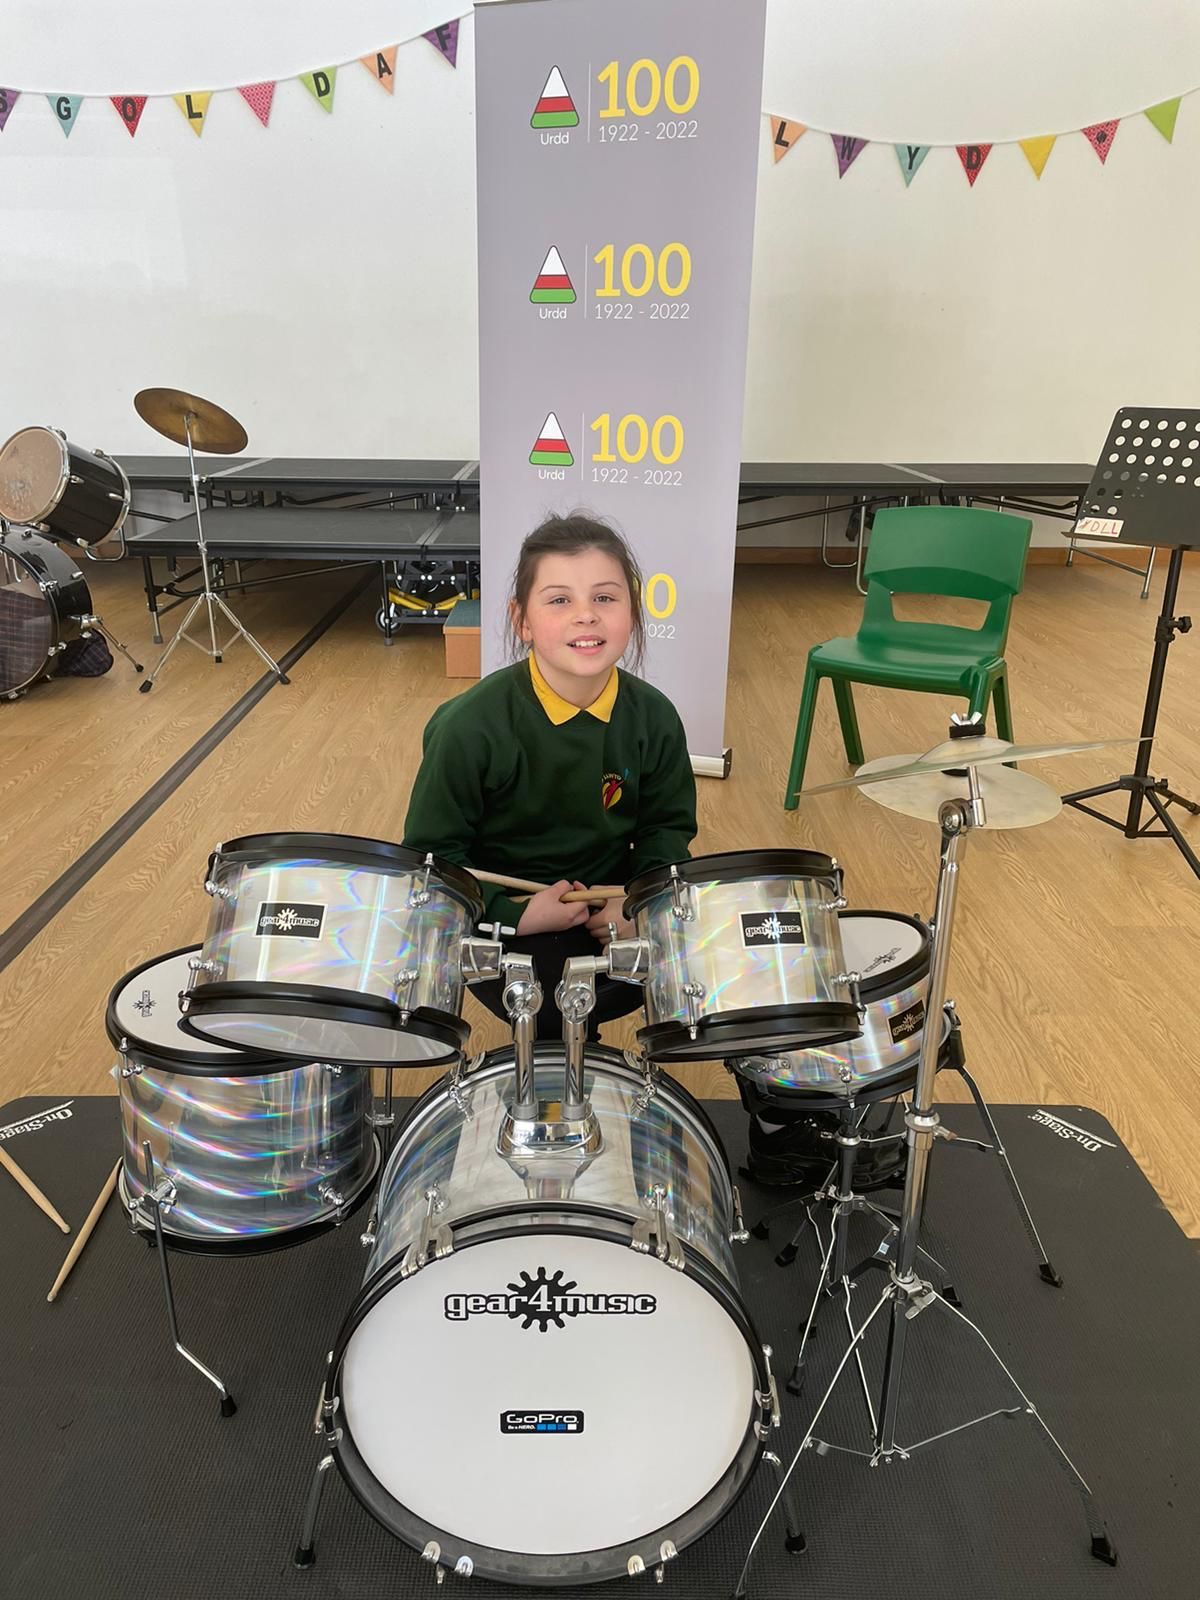 A drummer from Ysgol Dafydd Llwyd, Newtown will be competing in the percussion solo Year 6 and younger competition at the 2022 Urdd Eisteddfod in Denbigh.